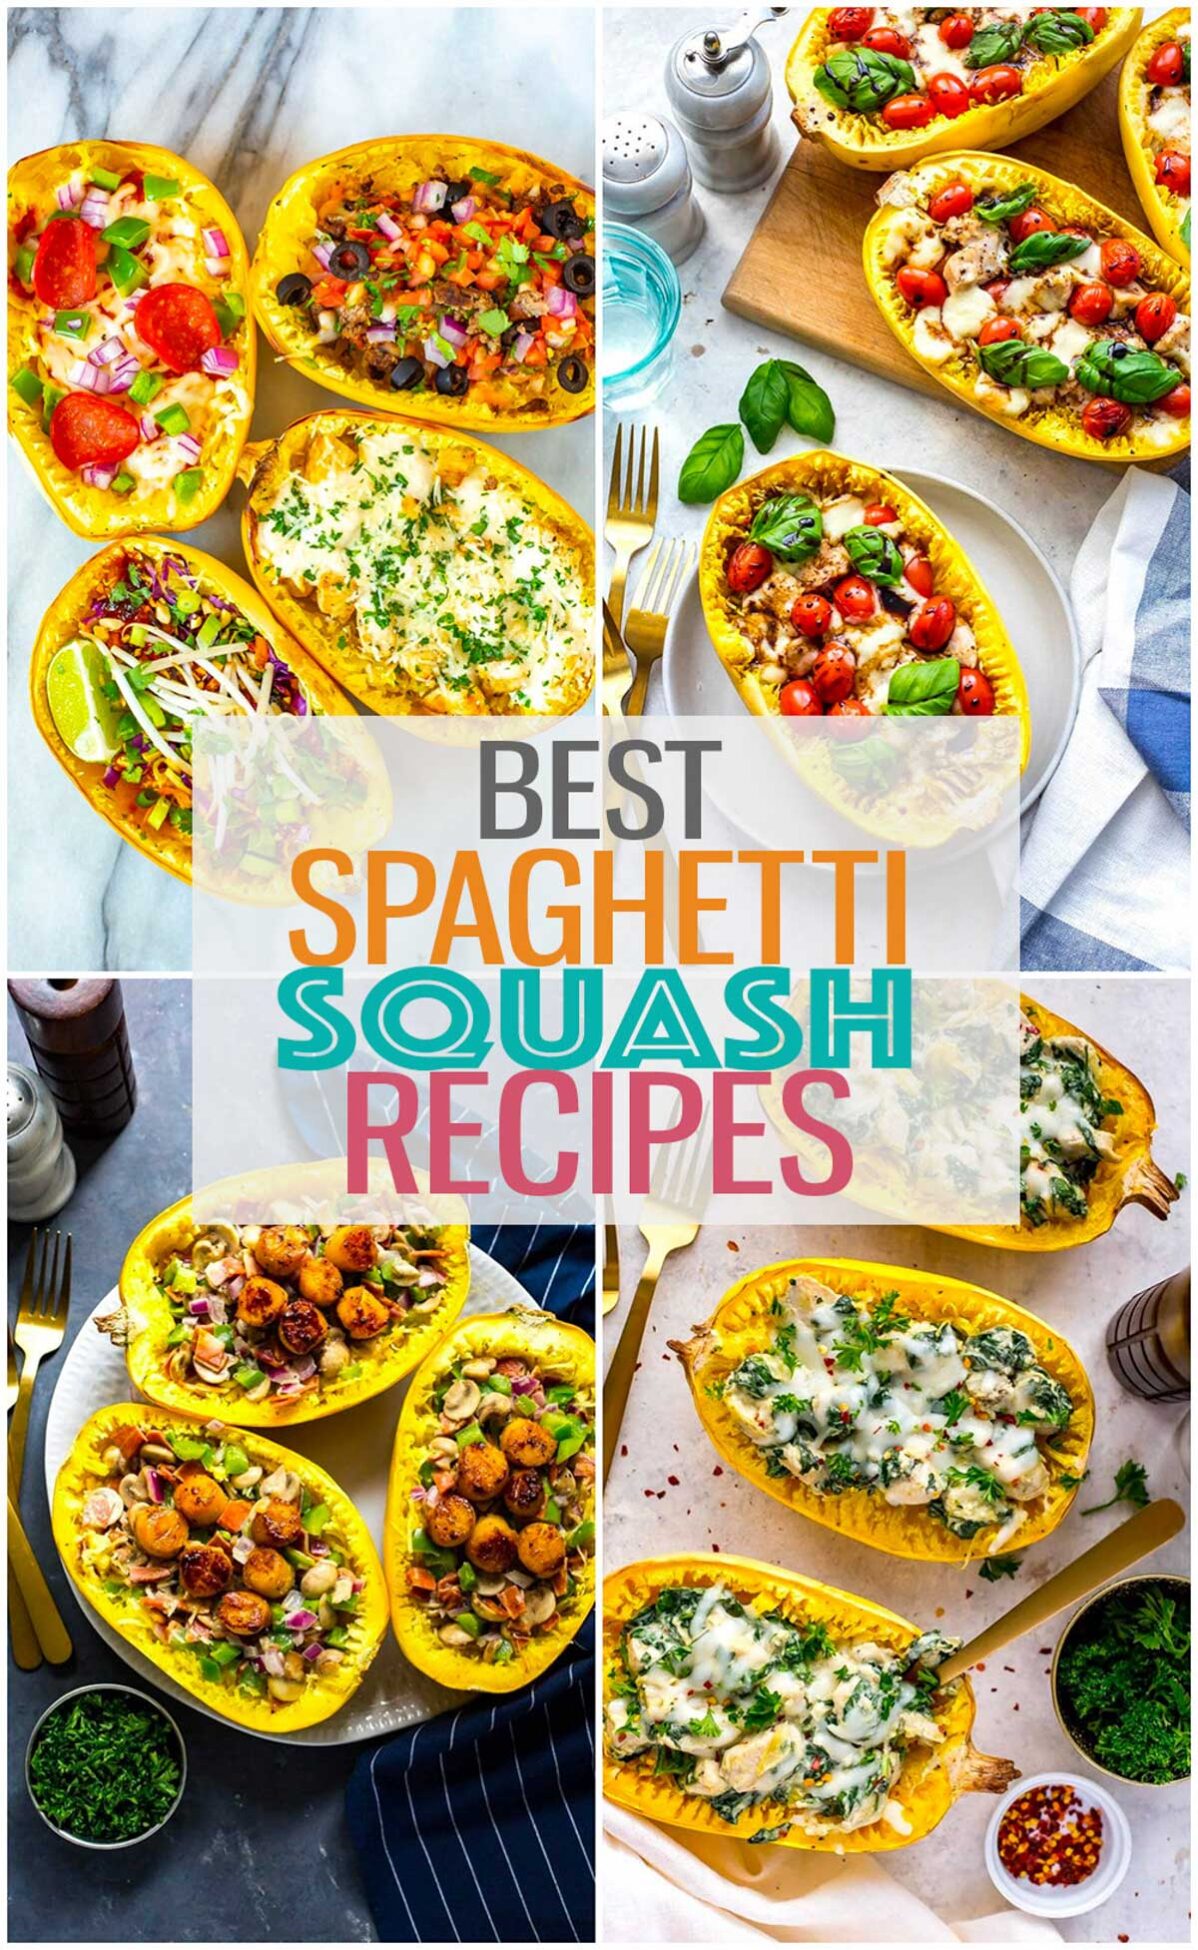 A collage of four different spaghetti squash recipes with the text "Best Spaghetti Squash Recipes" layered over top.